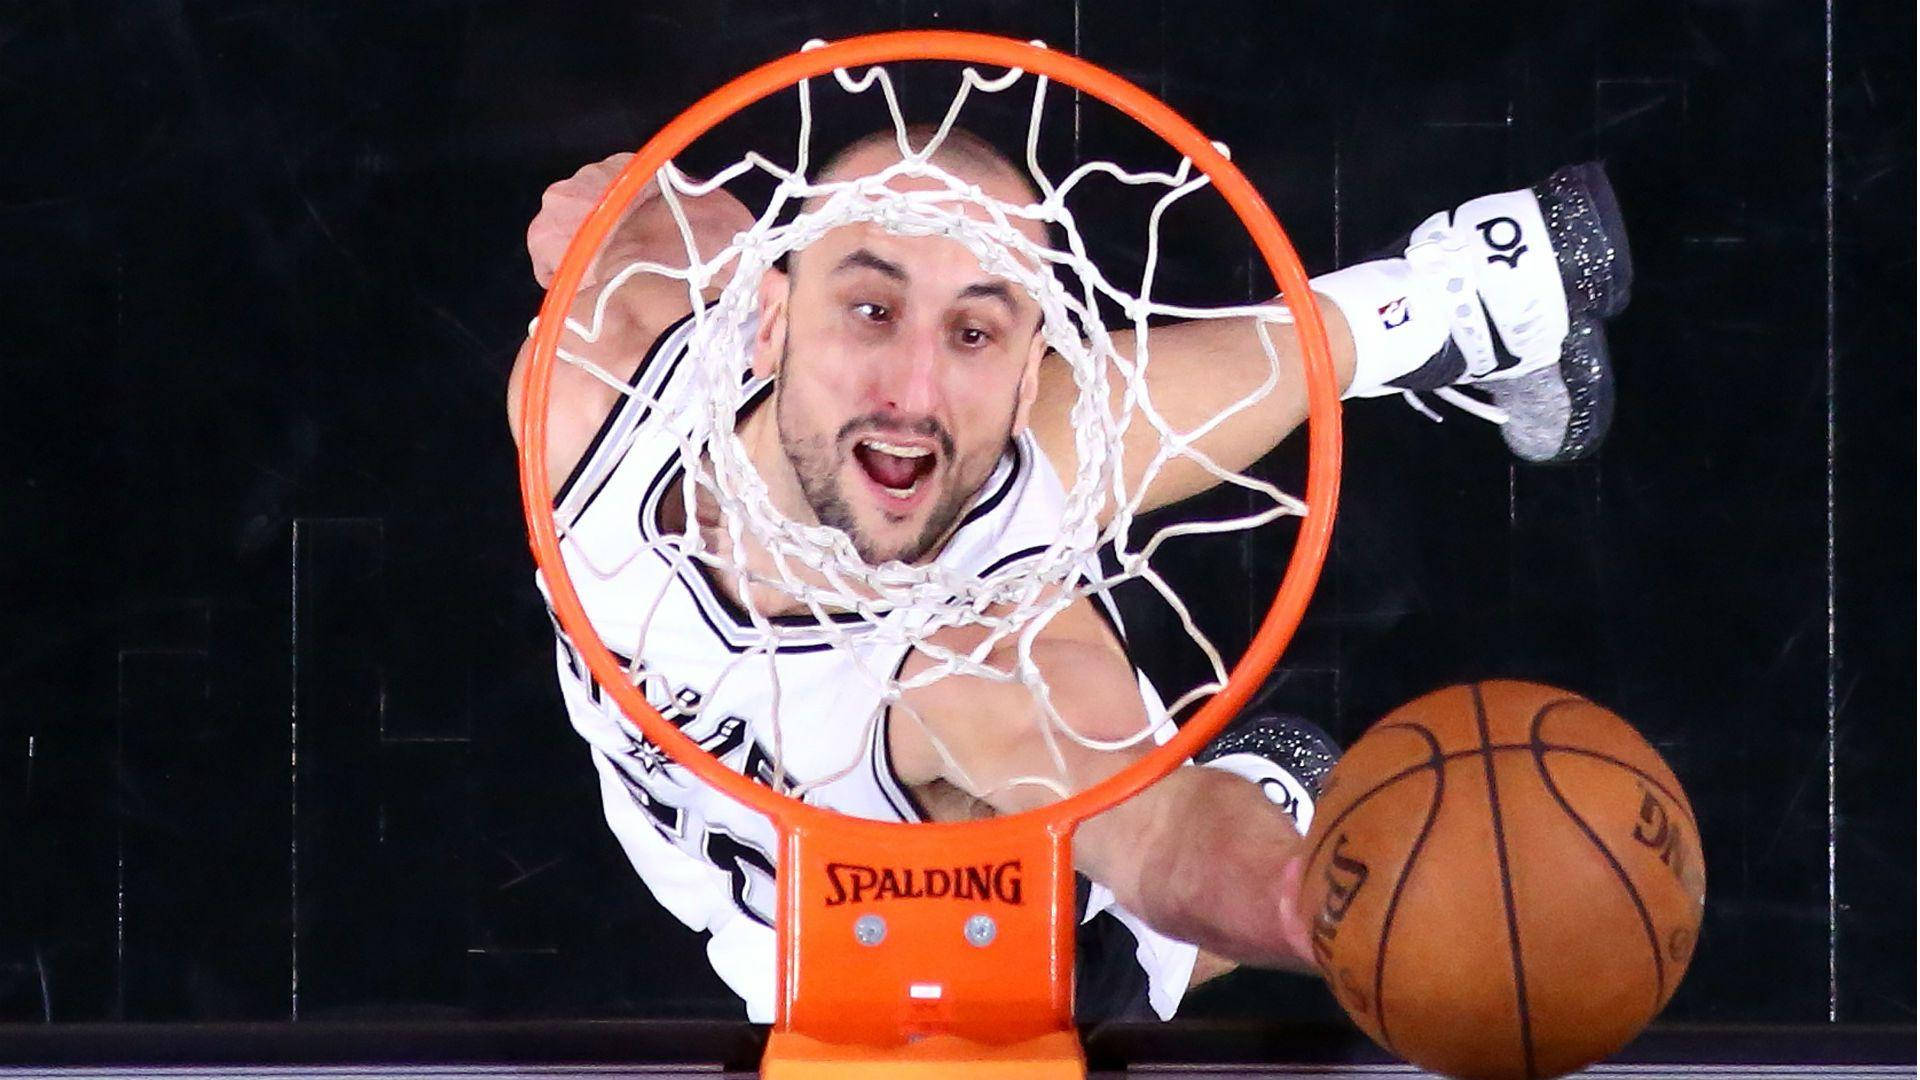 Manuginobili Gör En Layup - (this Sentence Could Be Used As A Caption For A Computer Or Mobile Wallpaper Featuring A Photo Of Manu Ginobili Doing A Layup.) Wallpaper